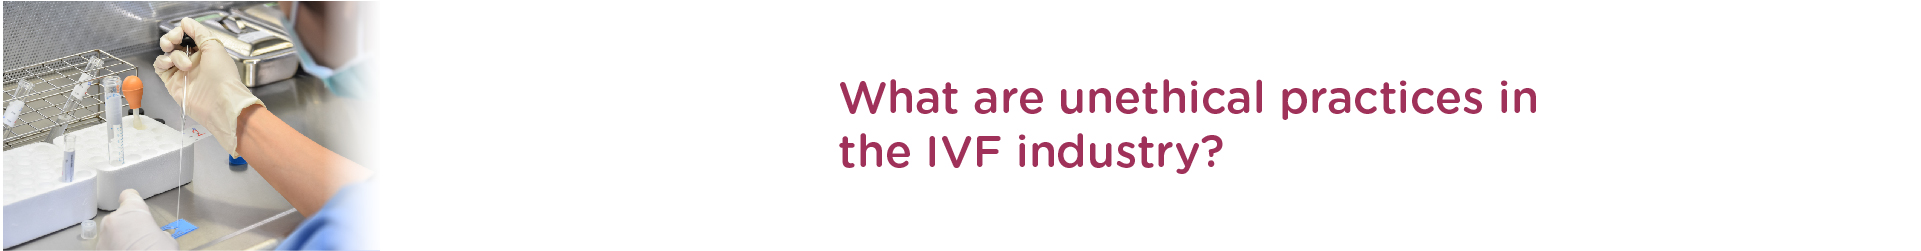 What are unethical practices in the IVF industry?